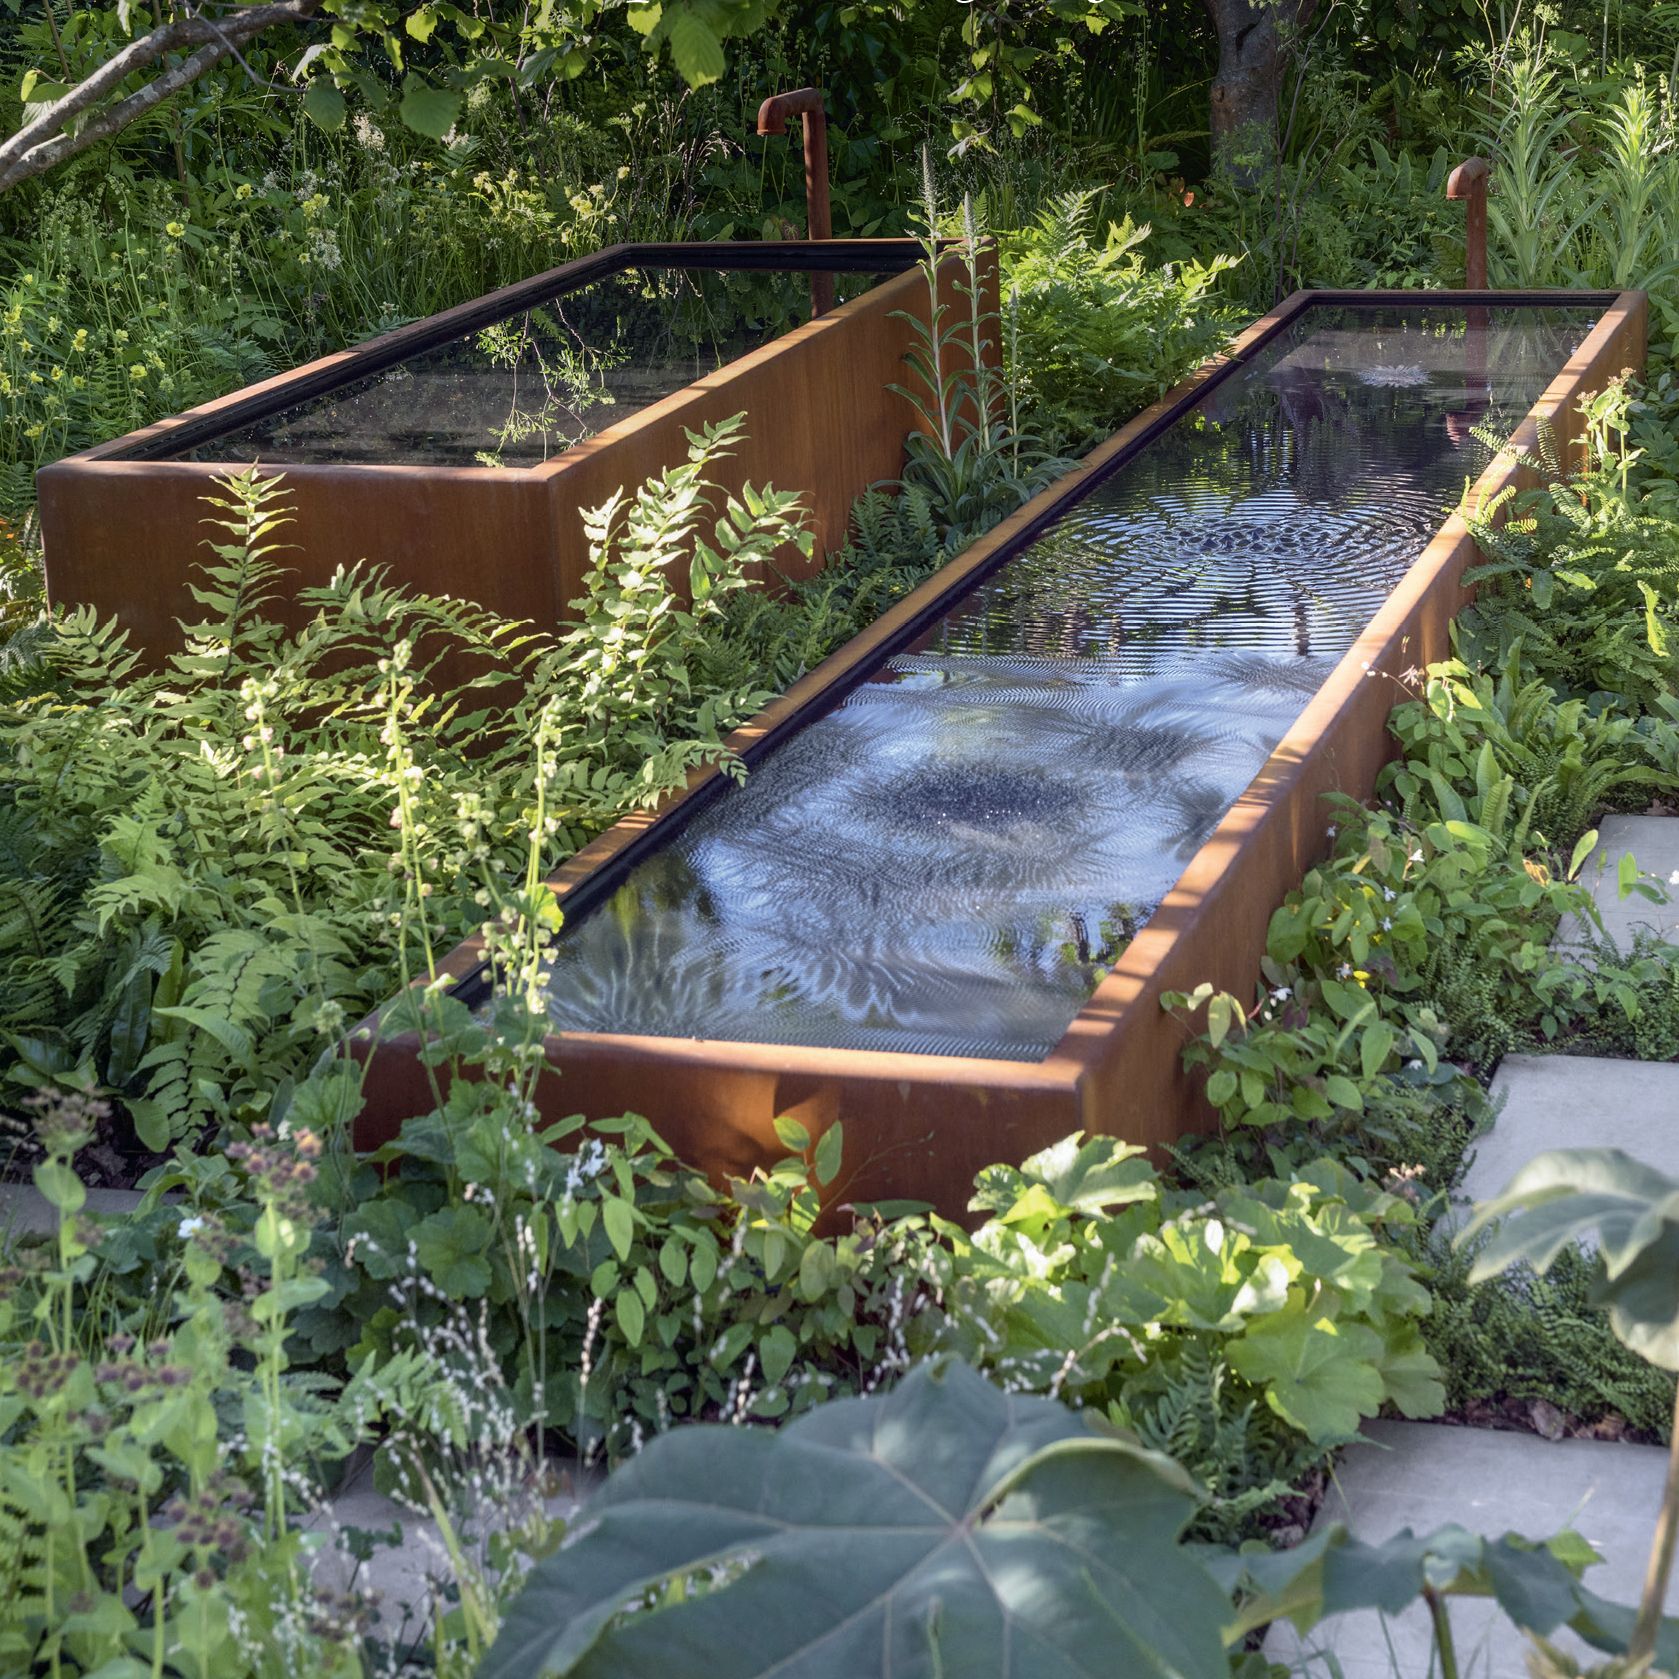 Water Feature Ideas 10 Simple Ways To, How To Make A Garden Water Wheel